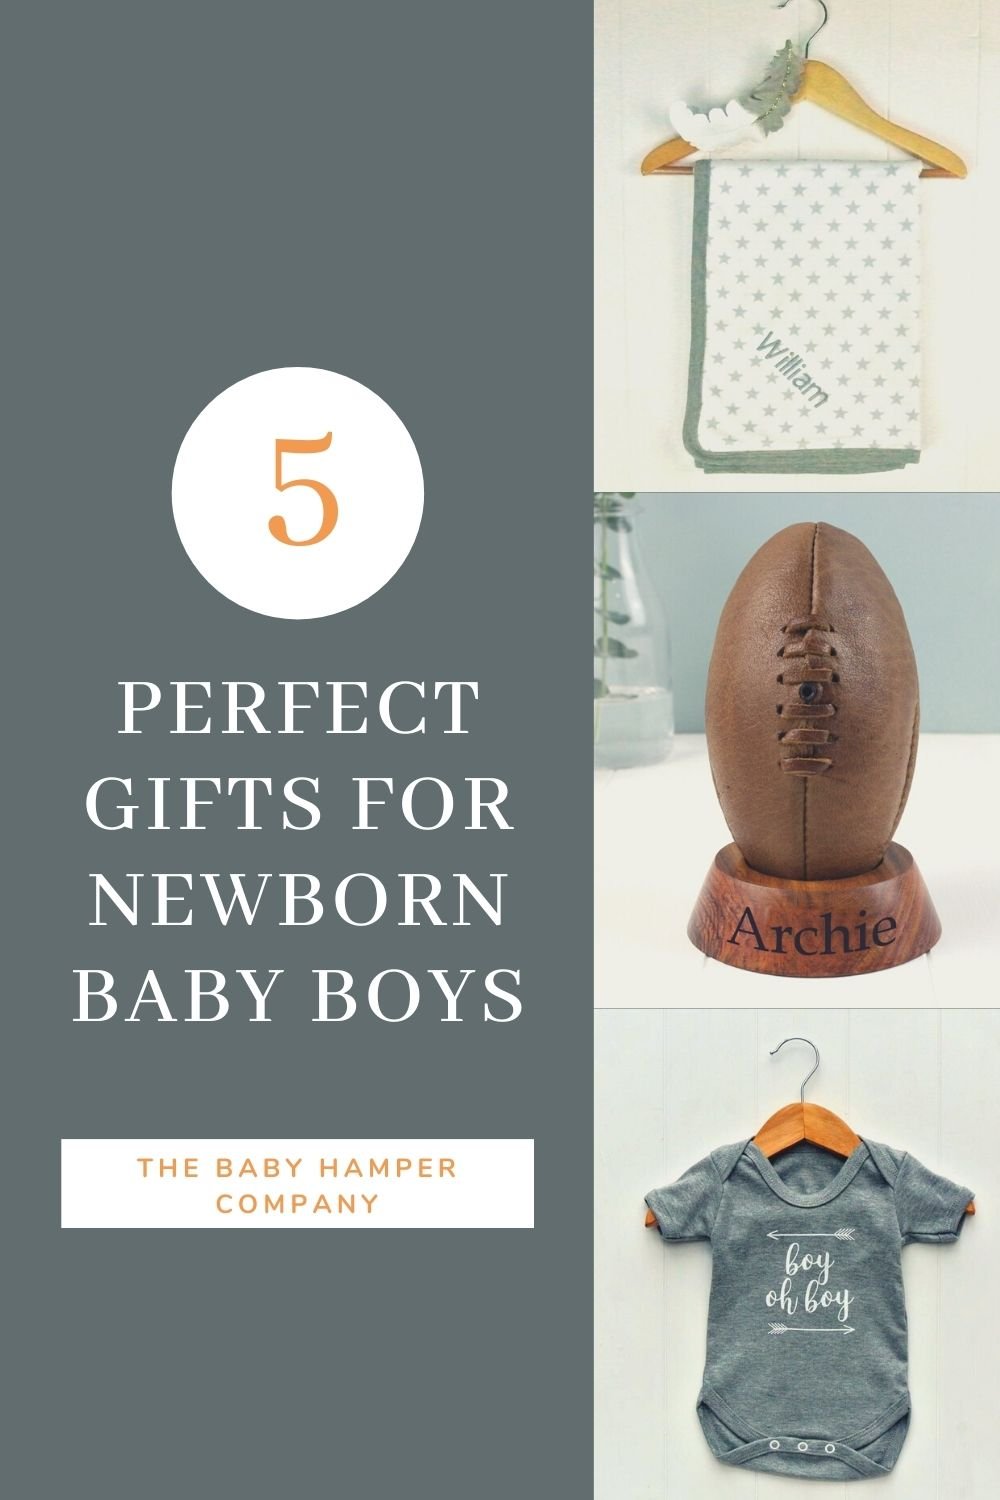 PERFECT GIFTS FOR NEWBORN BABY BOYS